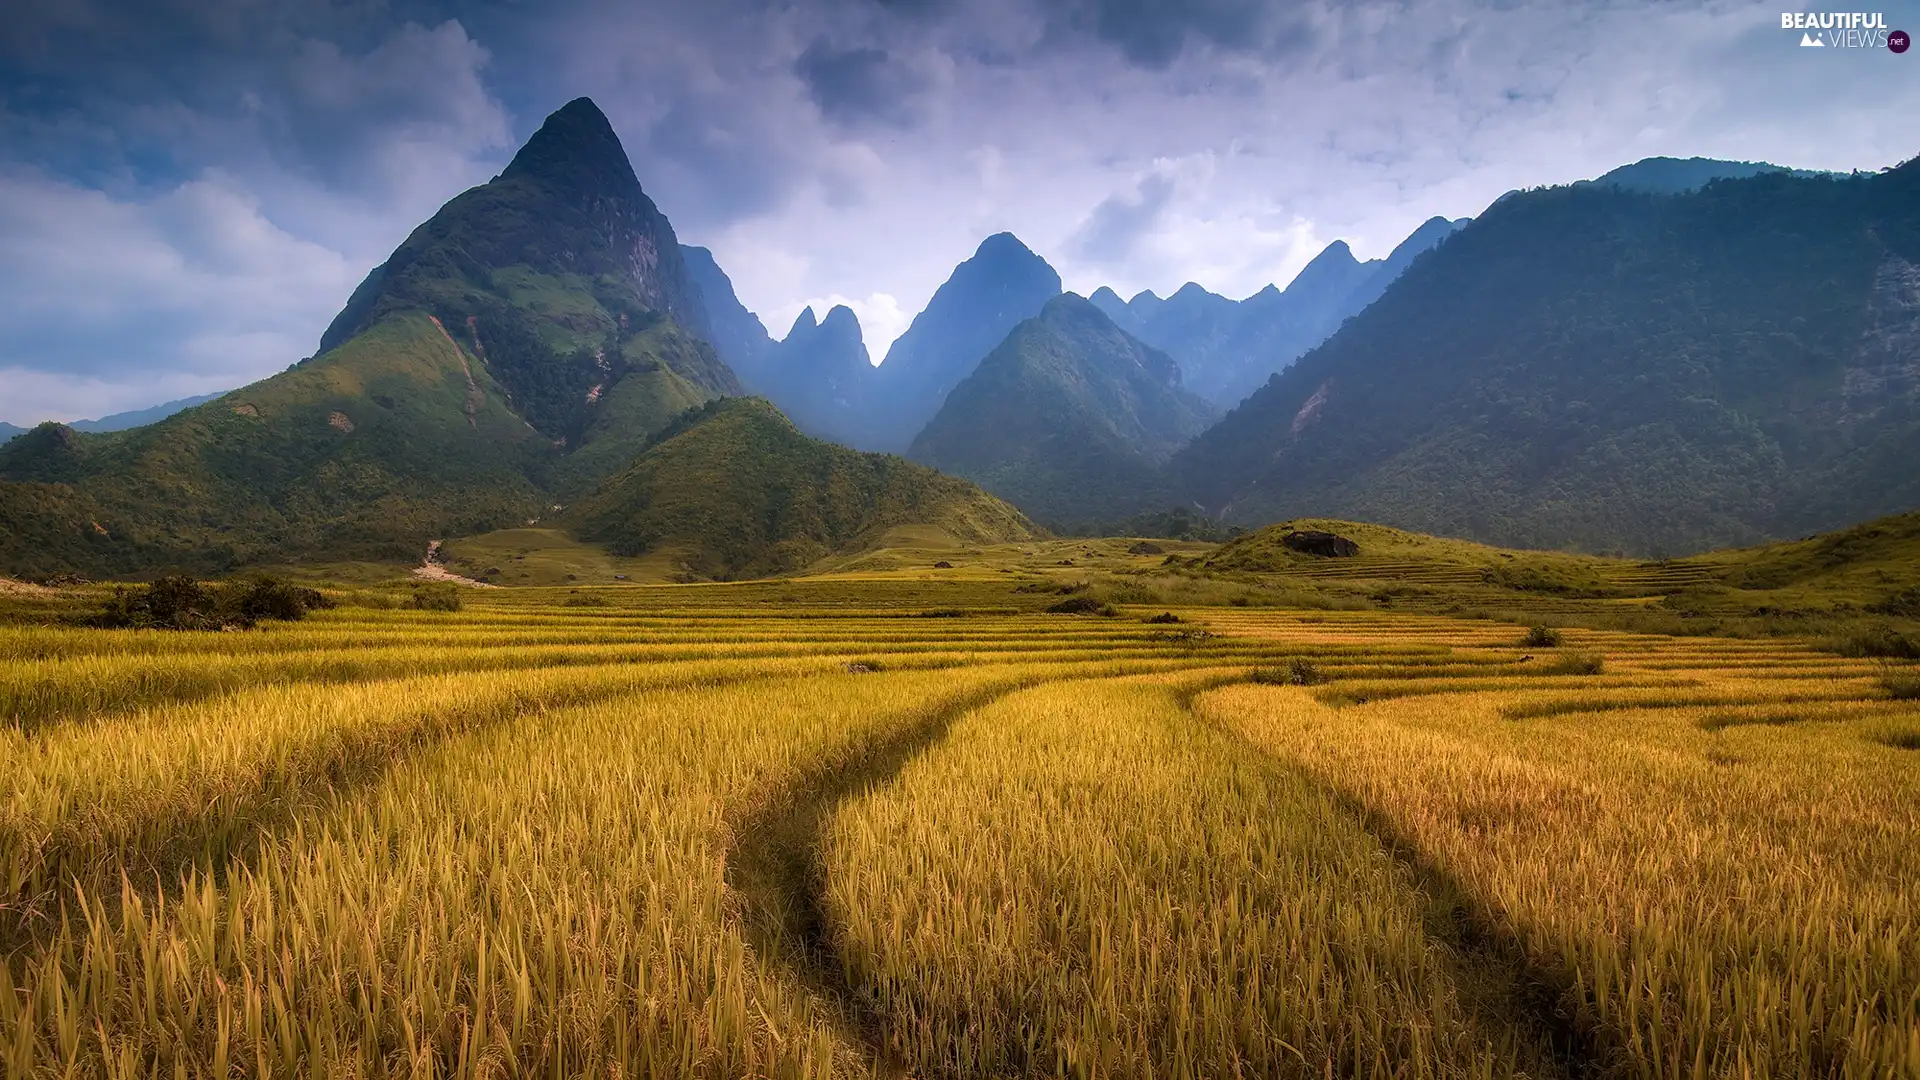 Mountains, field